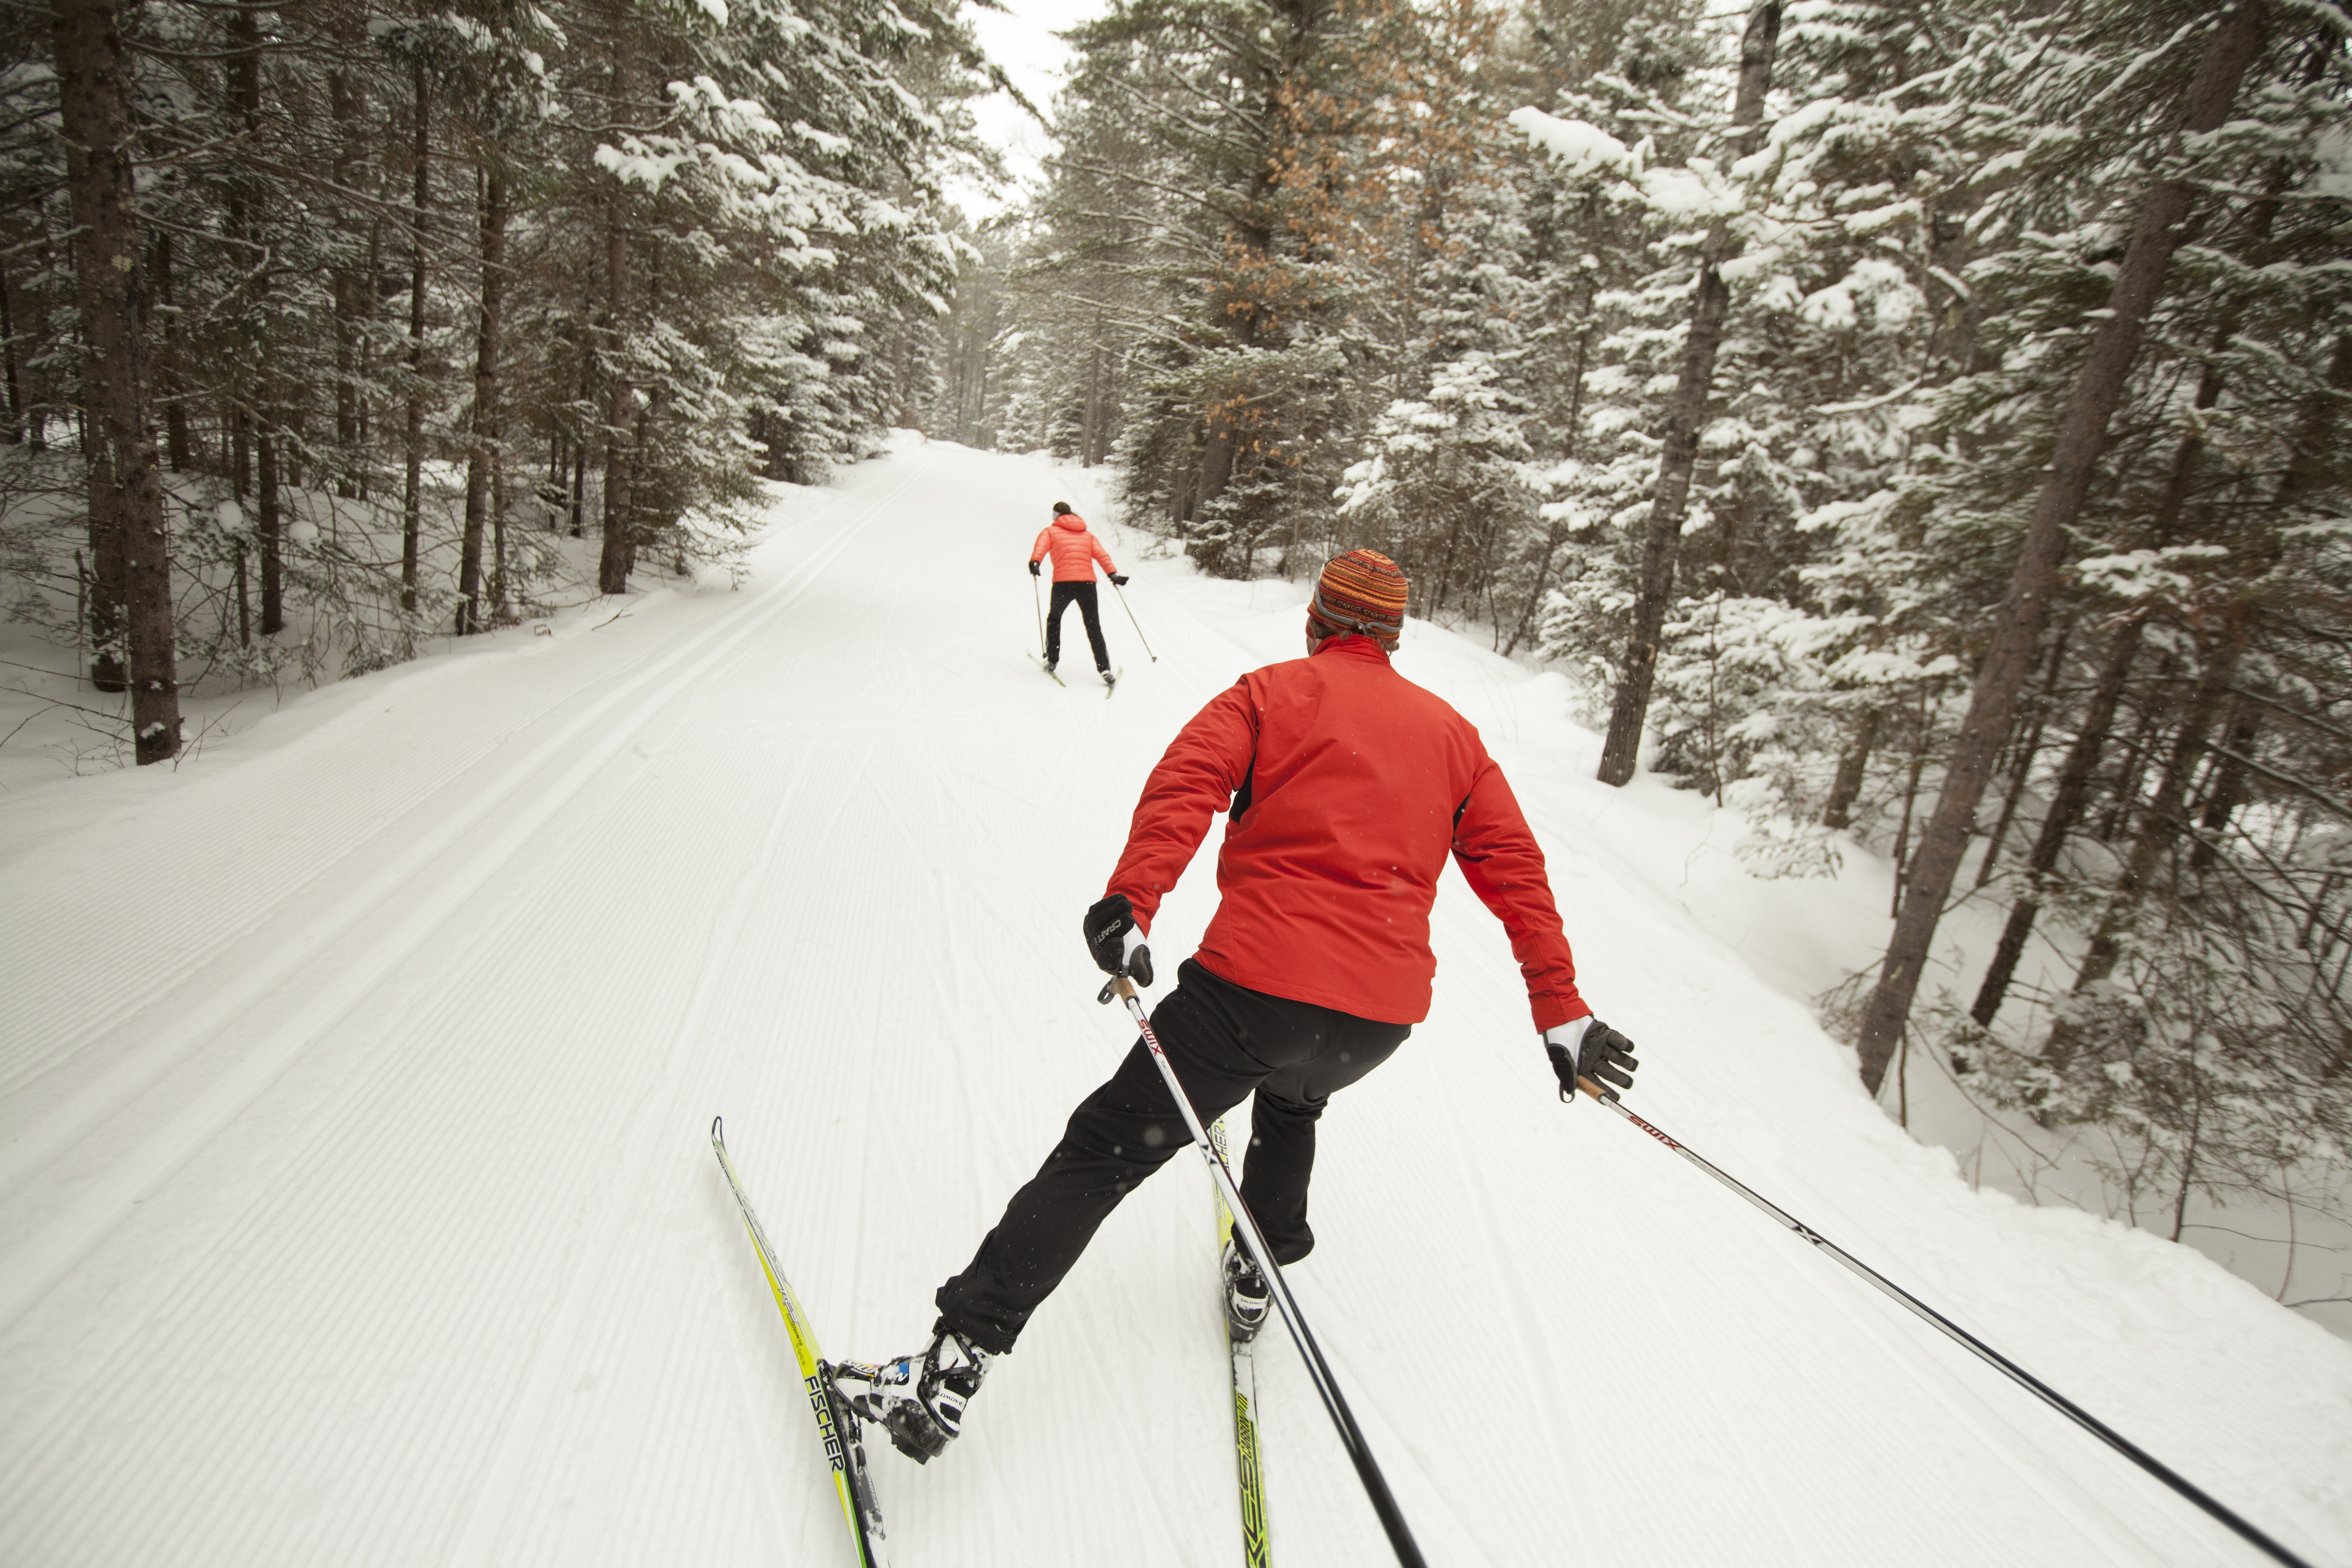 What's the Difference Between Nordic Skiing and Cross-Country